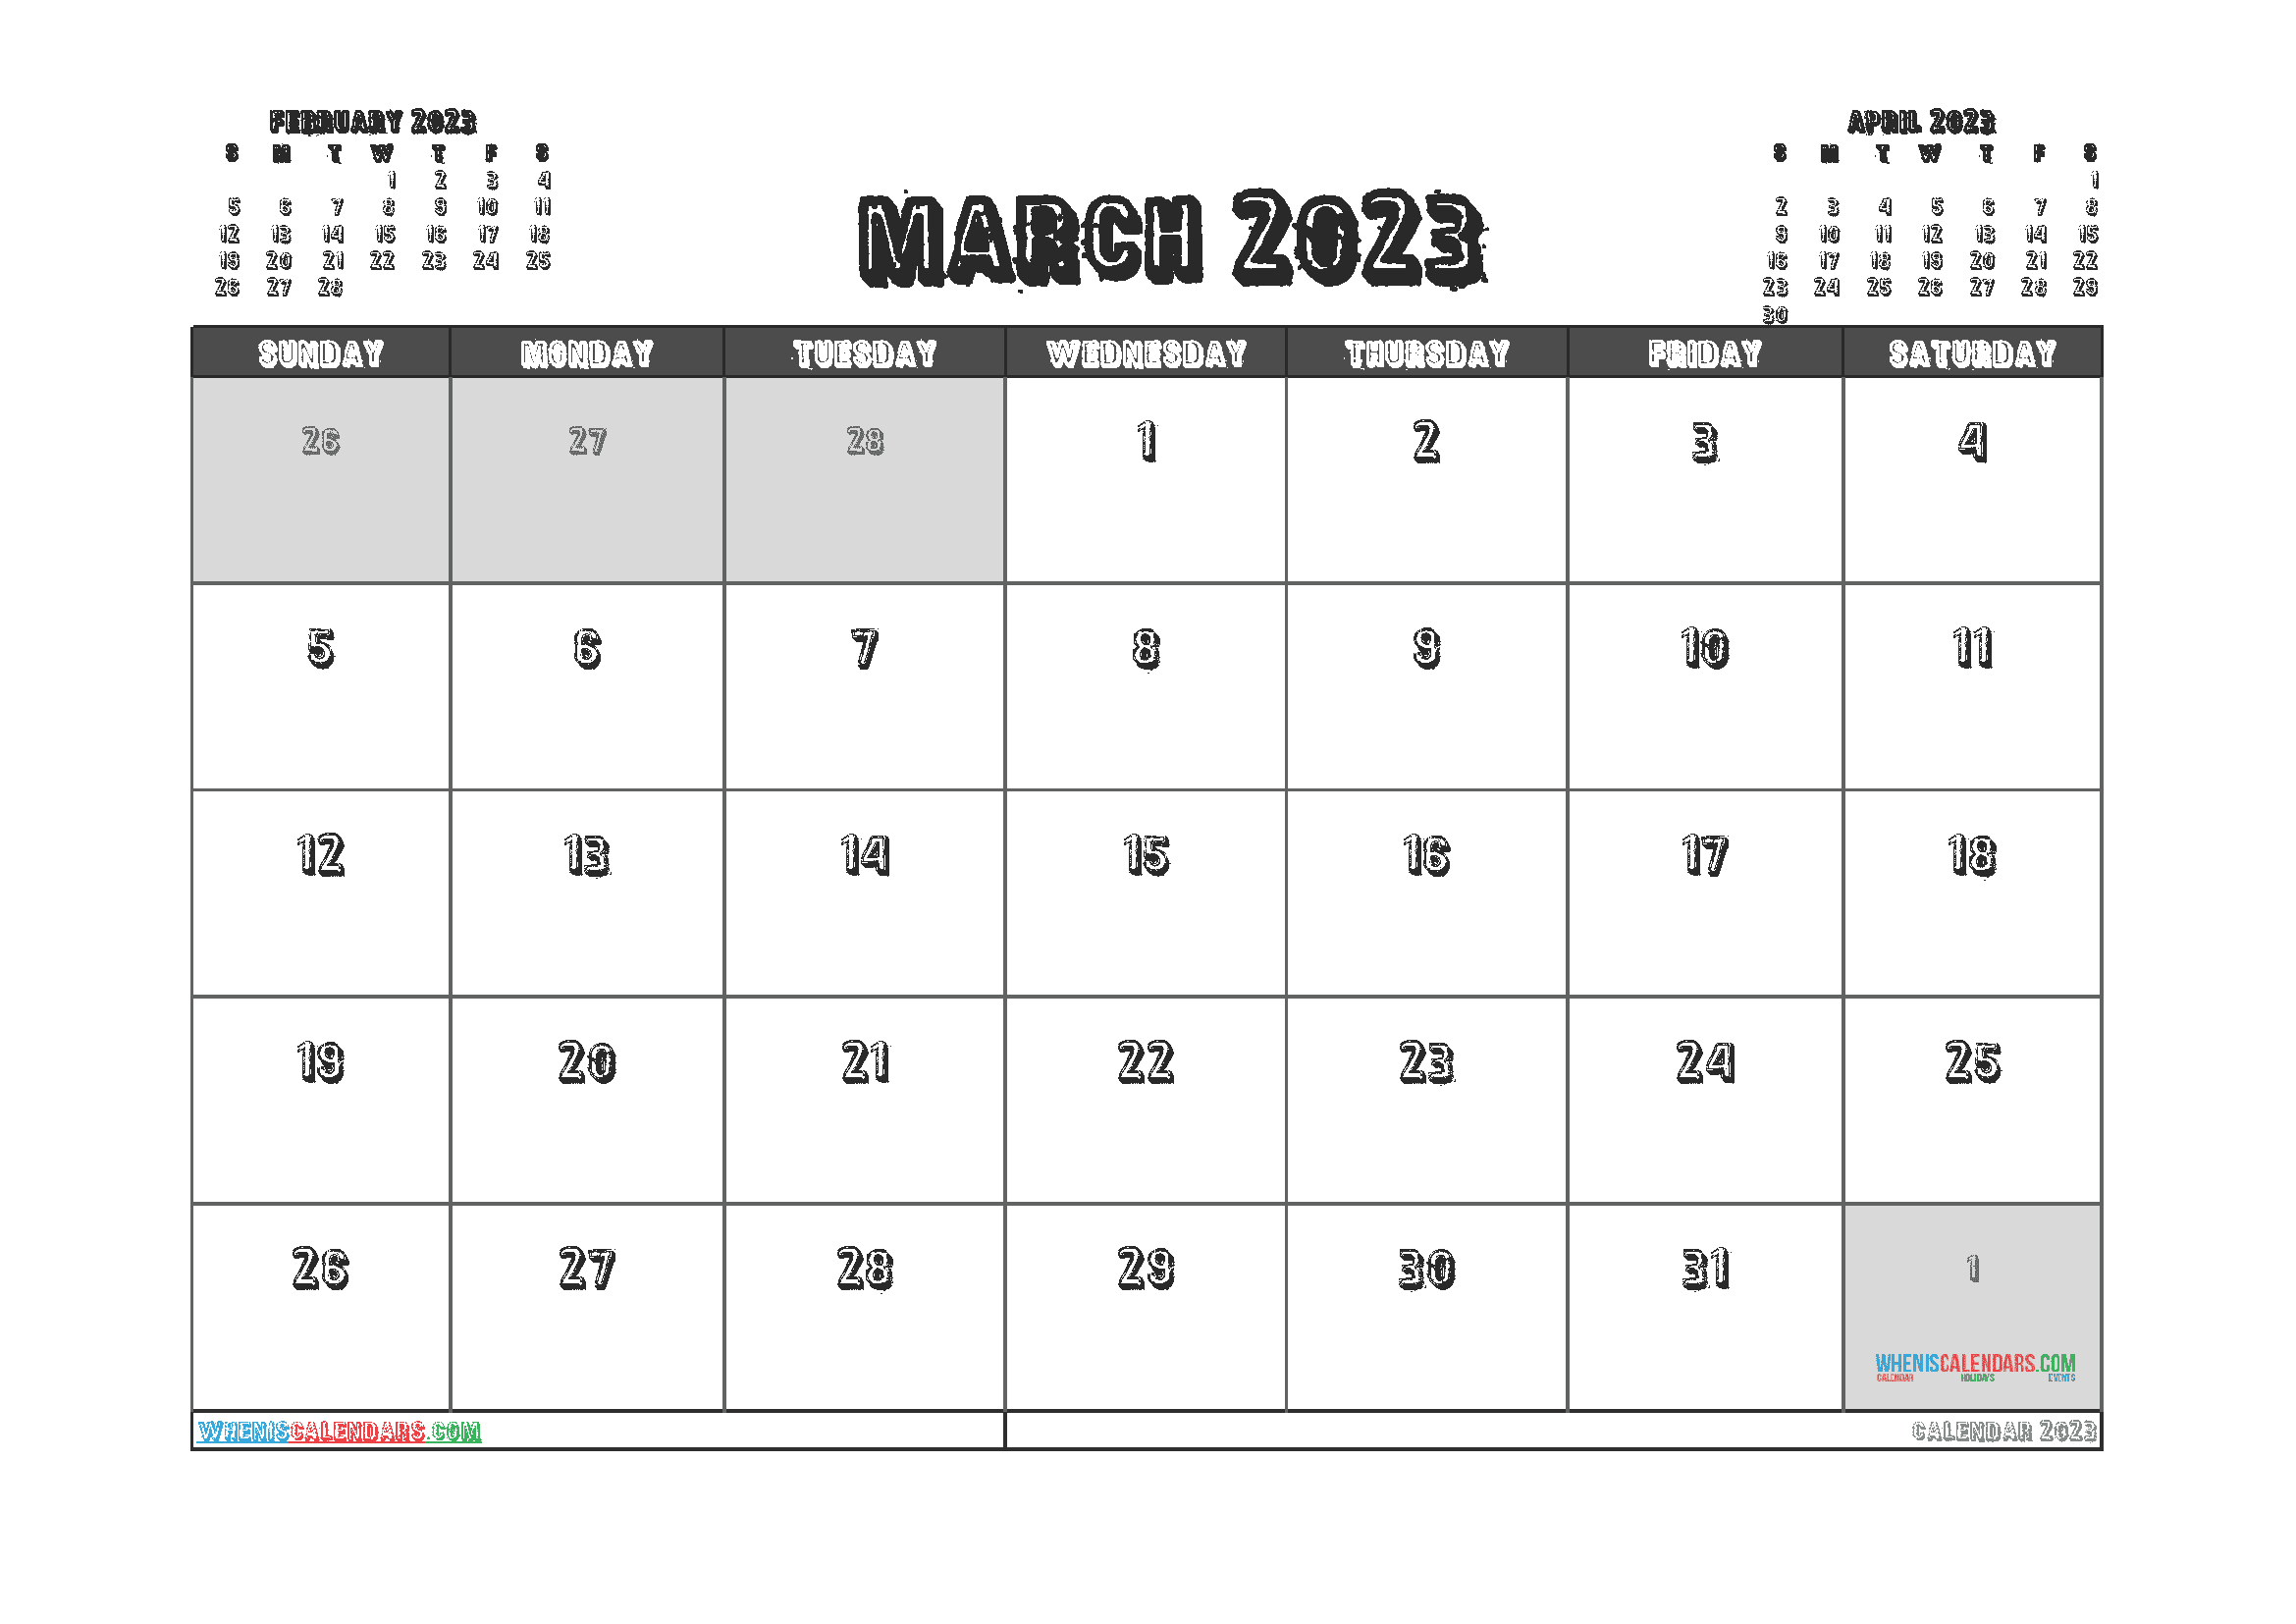 Free Calendar March 2023 with Holidays Printable PDF in Landscape